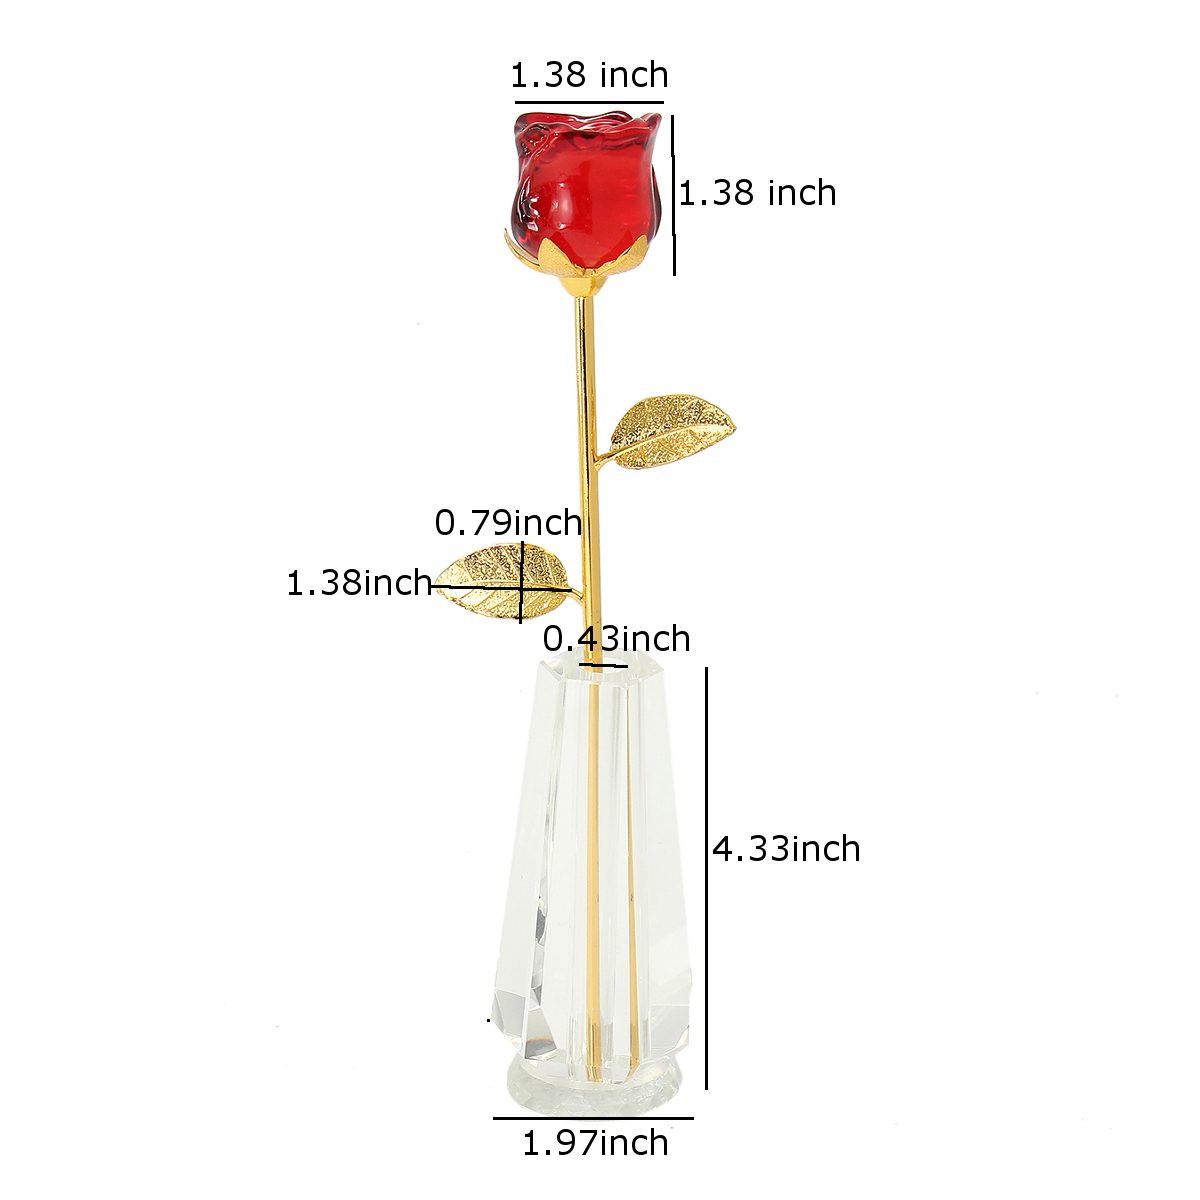 Crystal-Glass-Golden-Roses-Flower-Ornament-Valentine-Gifts-Present-with-Box-Home-Decorations-1430314-12